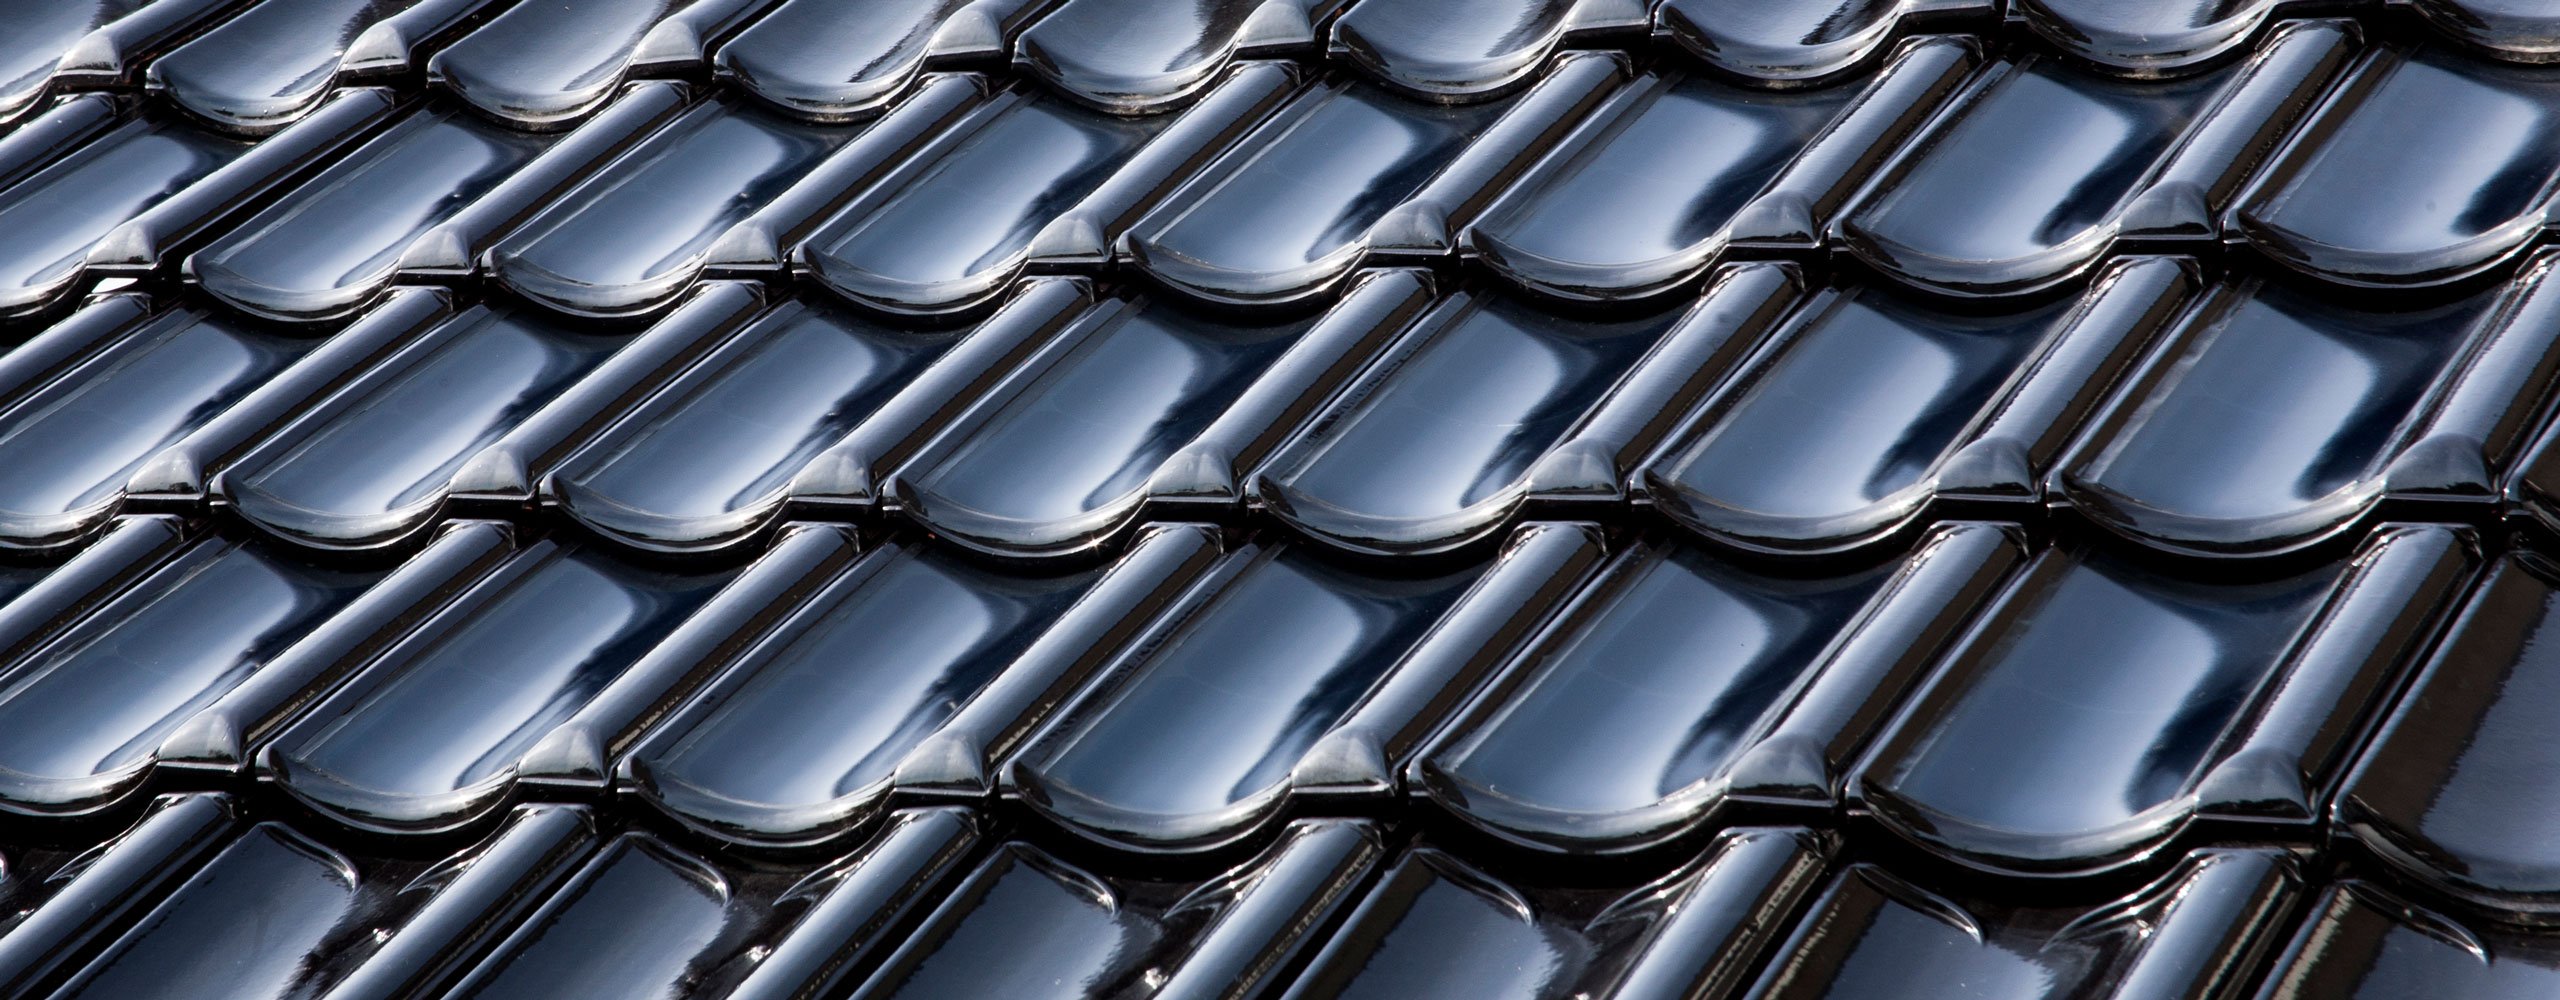 I. Introduction to Solar Roof Tiles